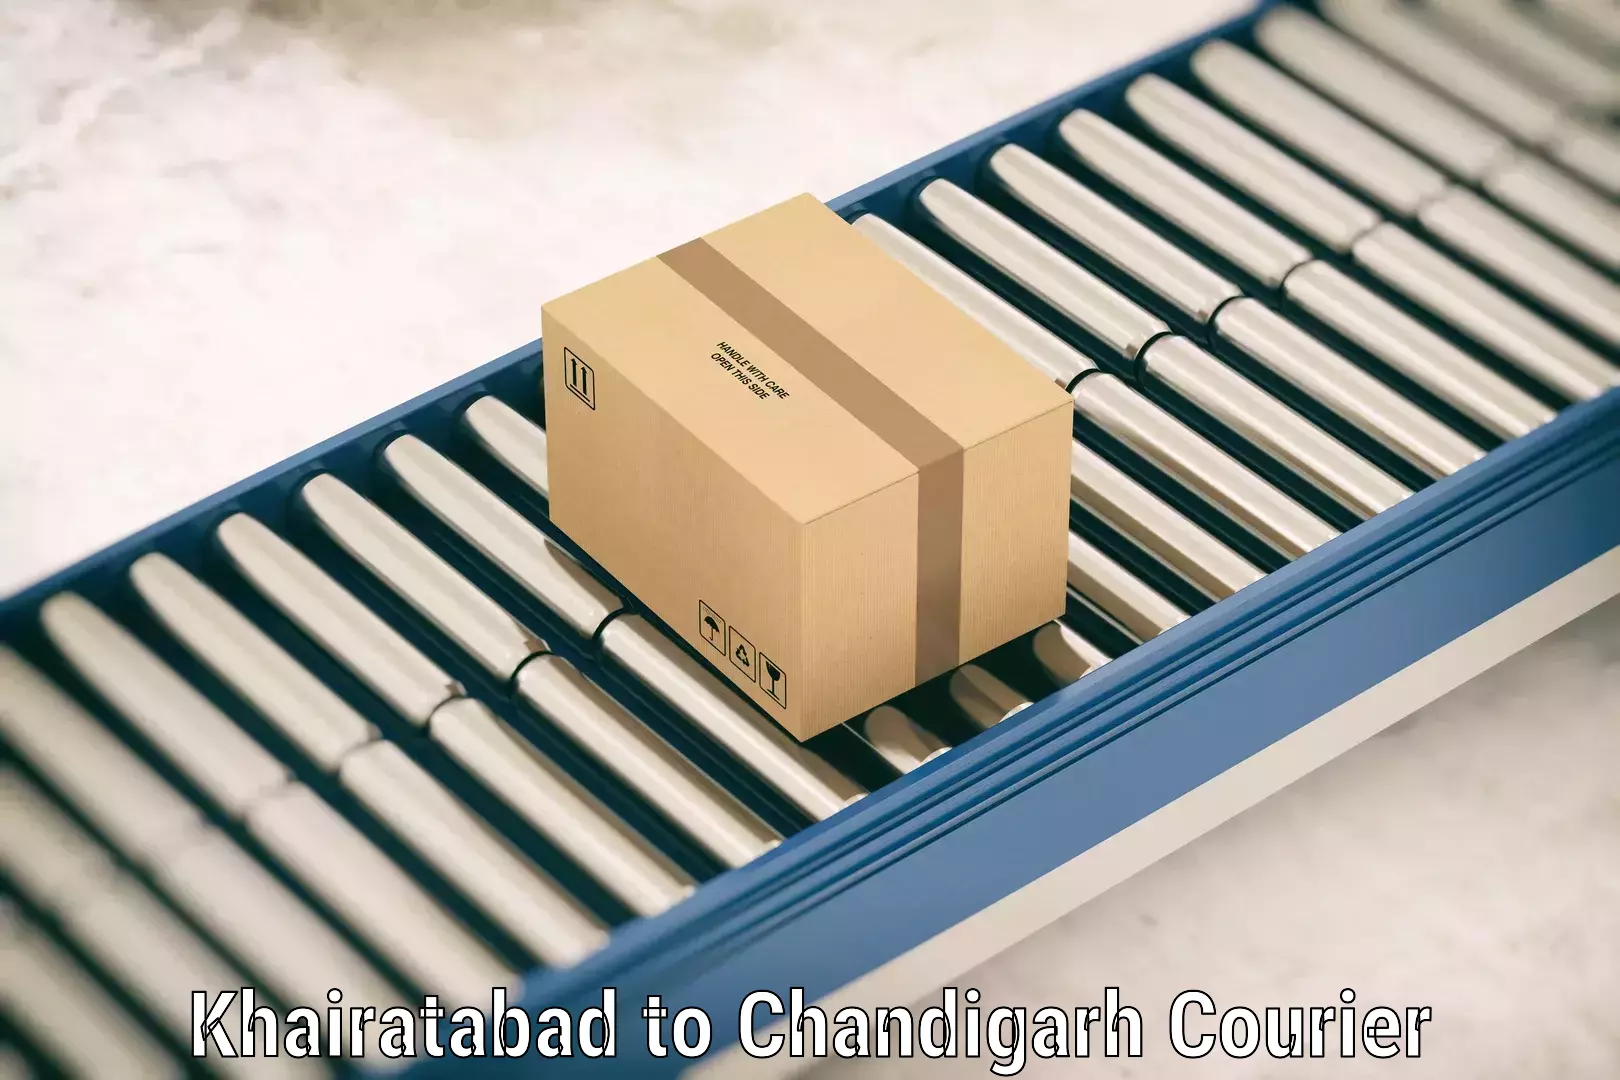 Luggage shipping guide Khairatabad to Chandigarh